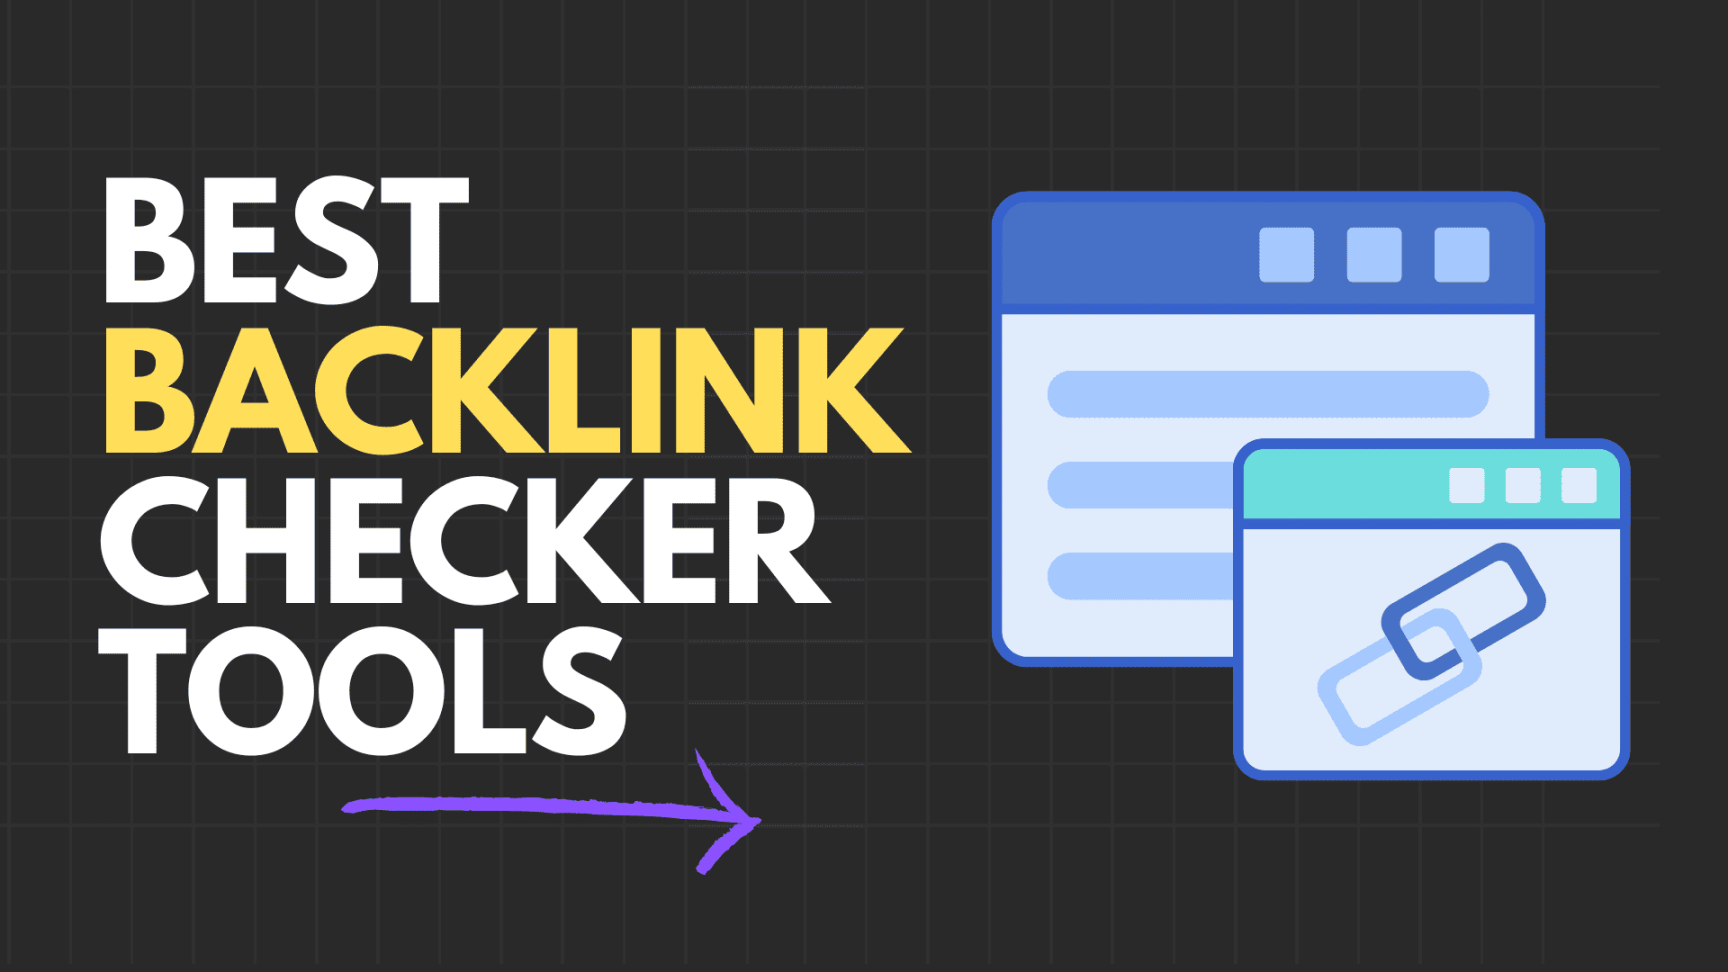 Best Backlink Checker Tools For Bloggers: Free And Paid Options